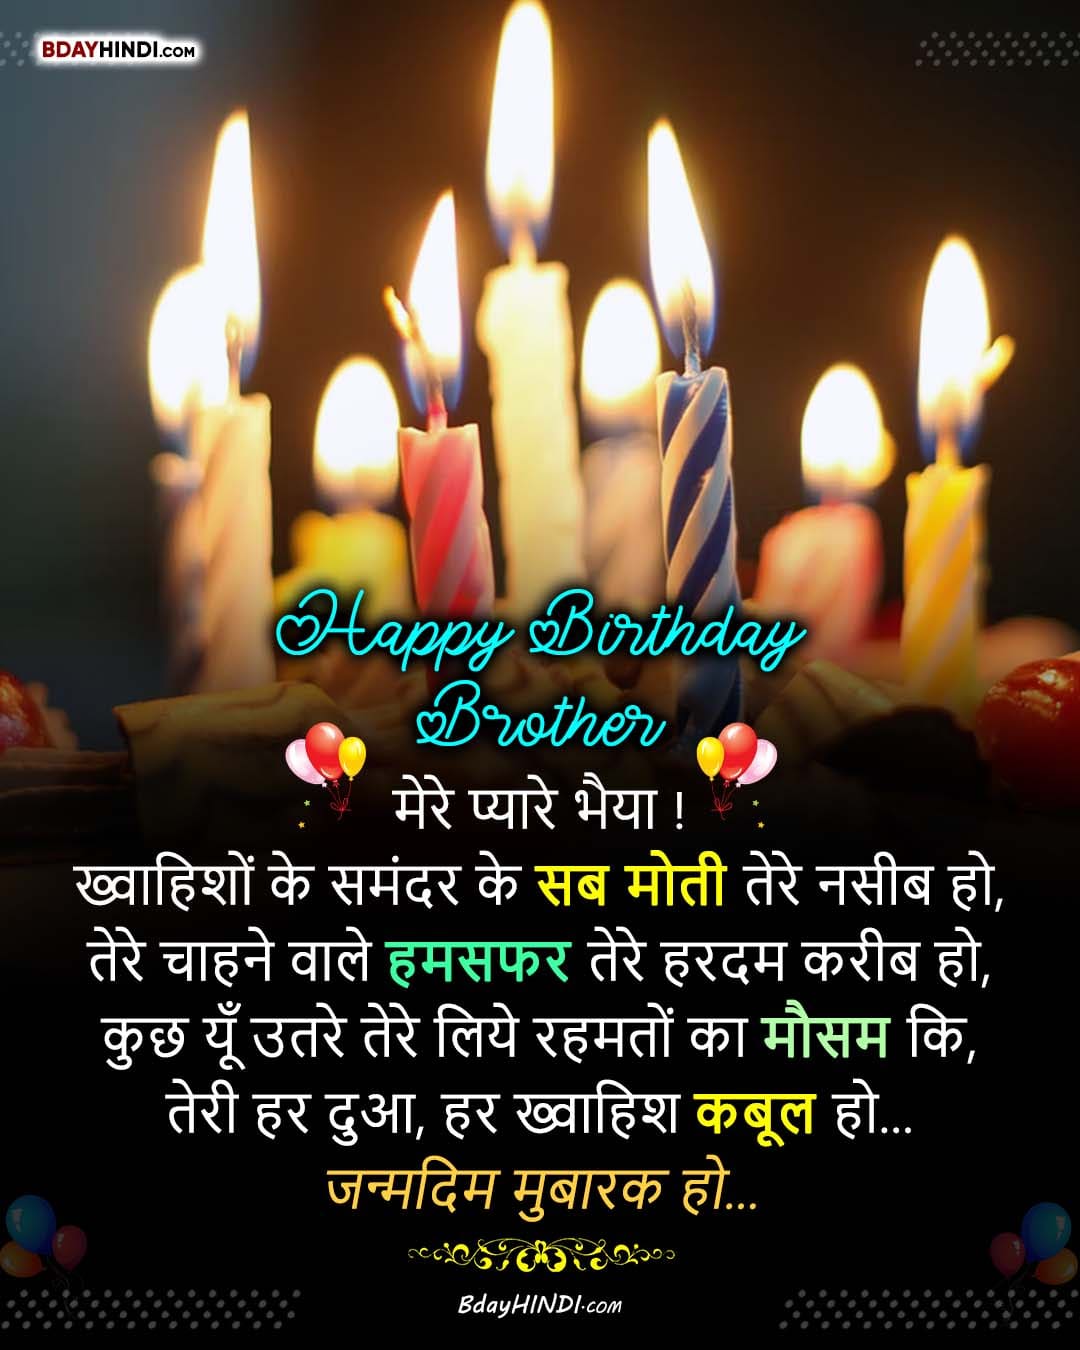 Happy Birthday Wishes for Brother Hindi